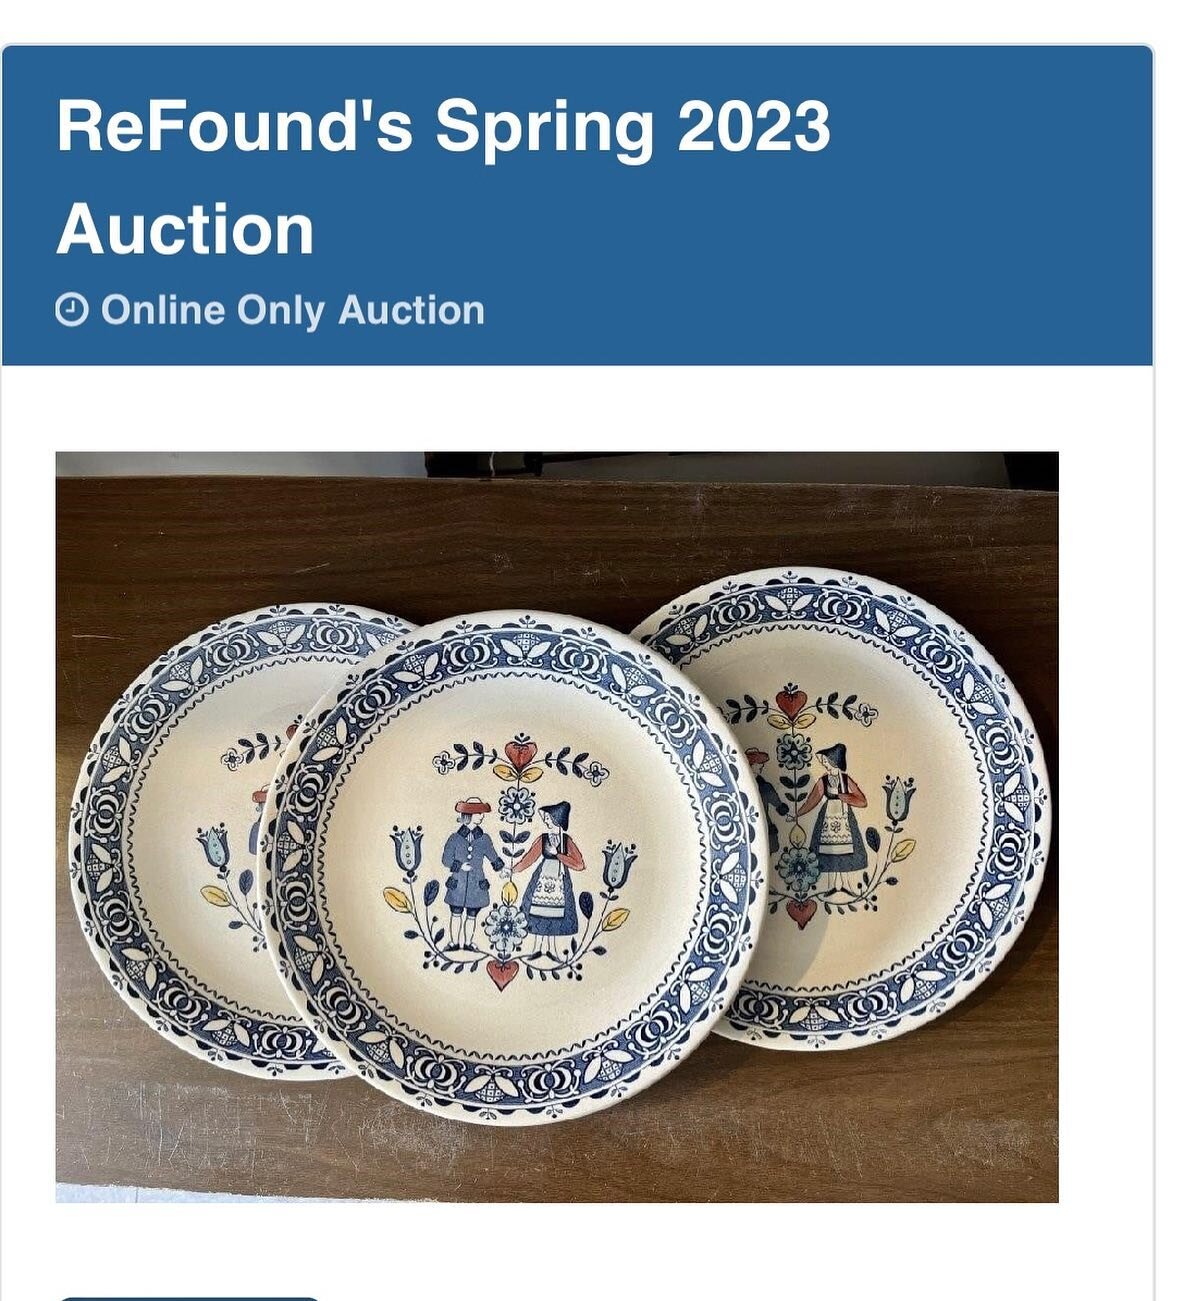 ⭐️Happy Bidding⭐️

Our online auction is live! Create or login to your hibid account and set your bids! (Link in bio)

The auction runs until May 24th

⭐️ Important Details ⭐️

All payment is charged at time of pick up at ReFound. We accept cash, Mas